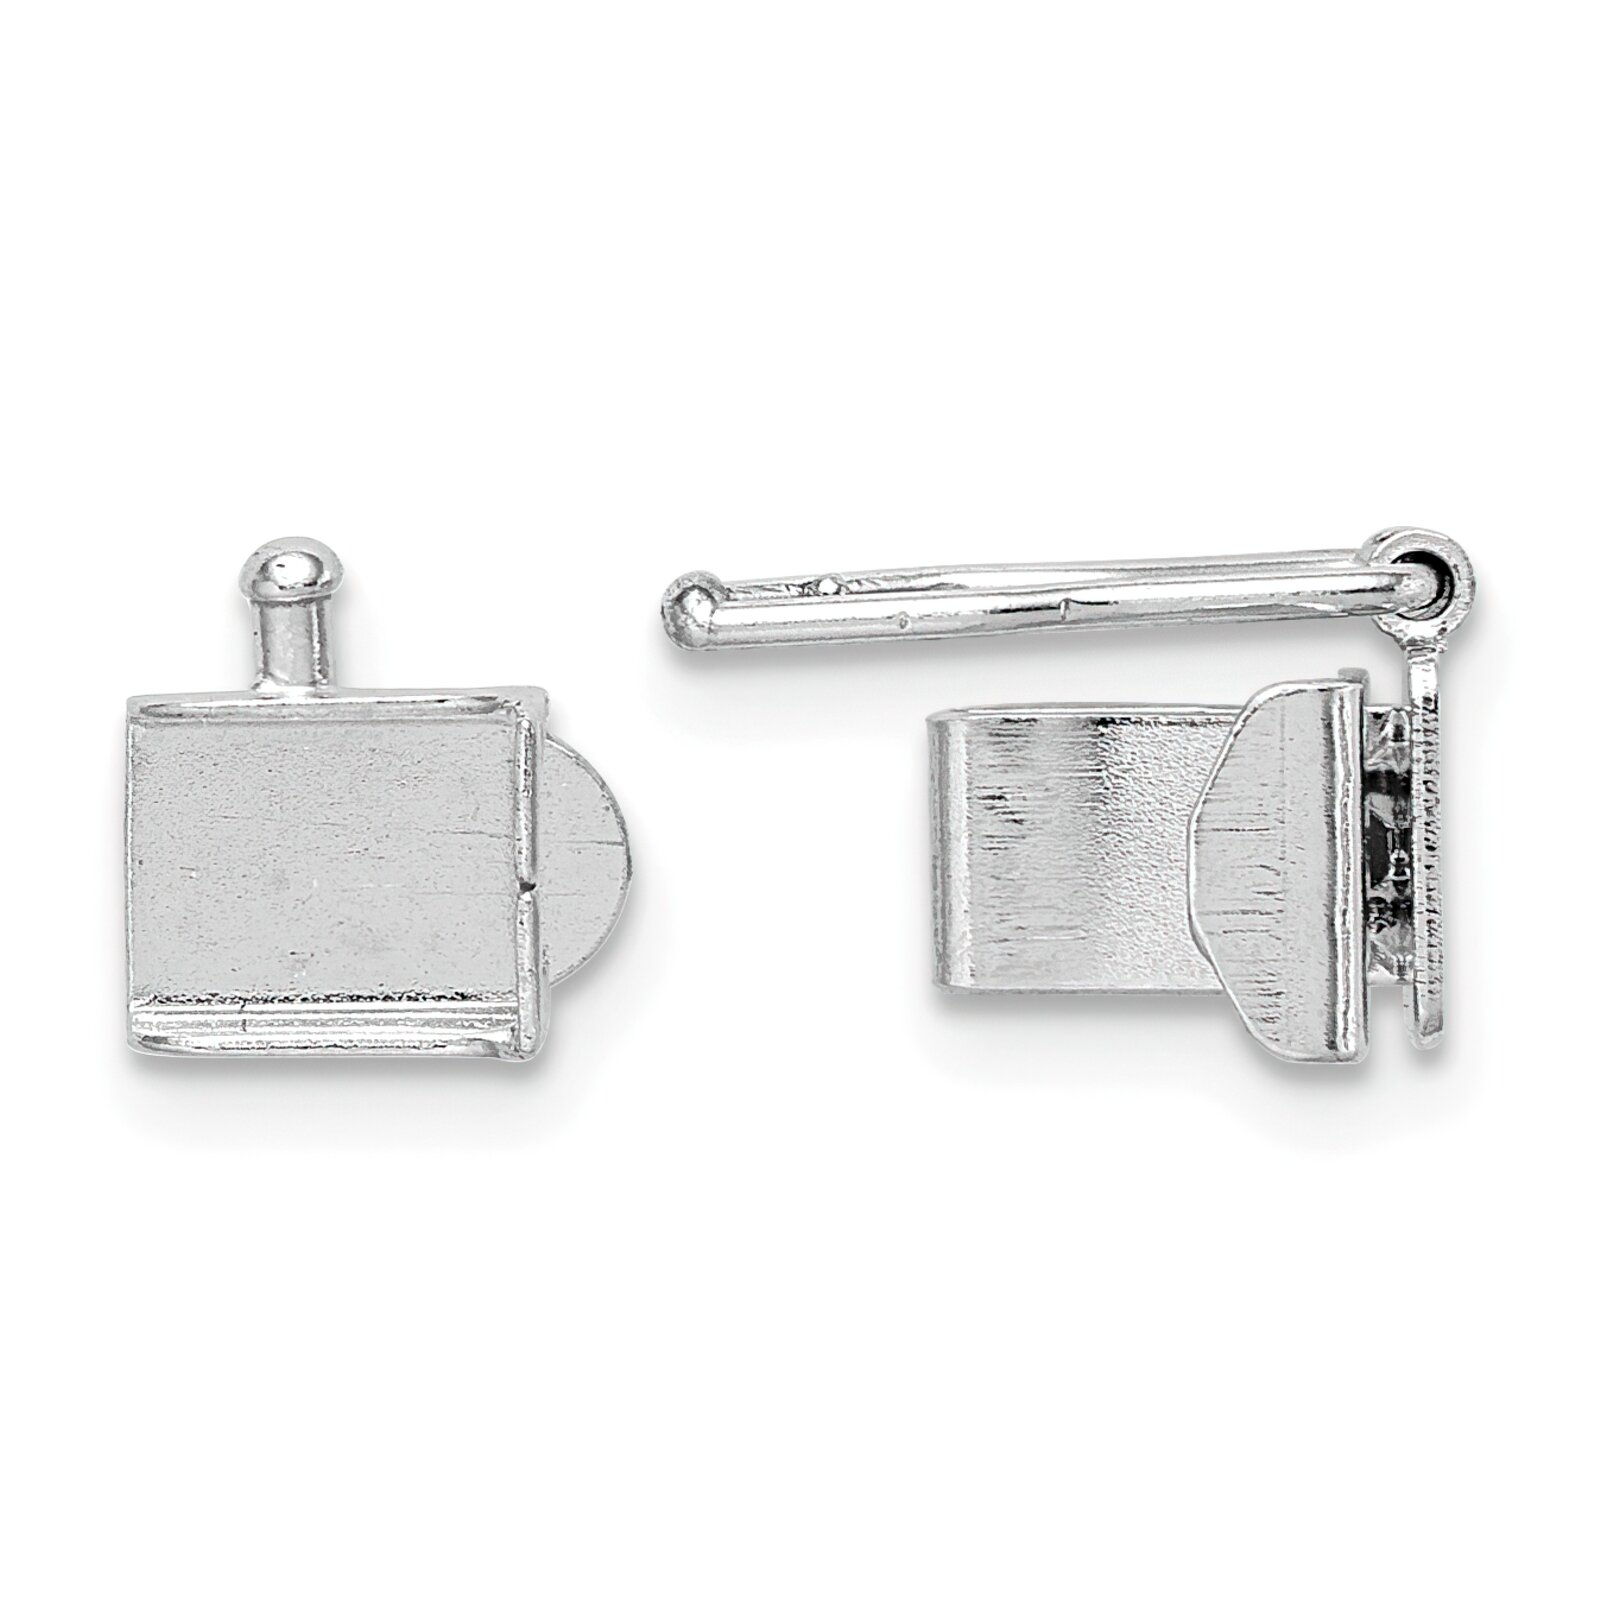 Findingking 14K White Gold Push Button Box Clasp WG1854